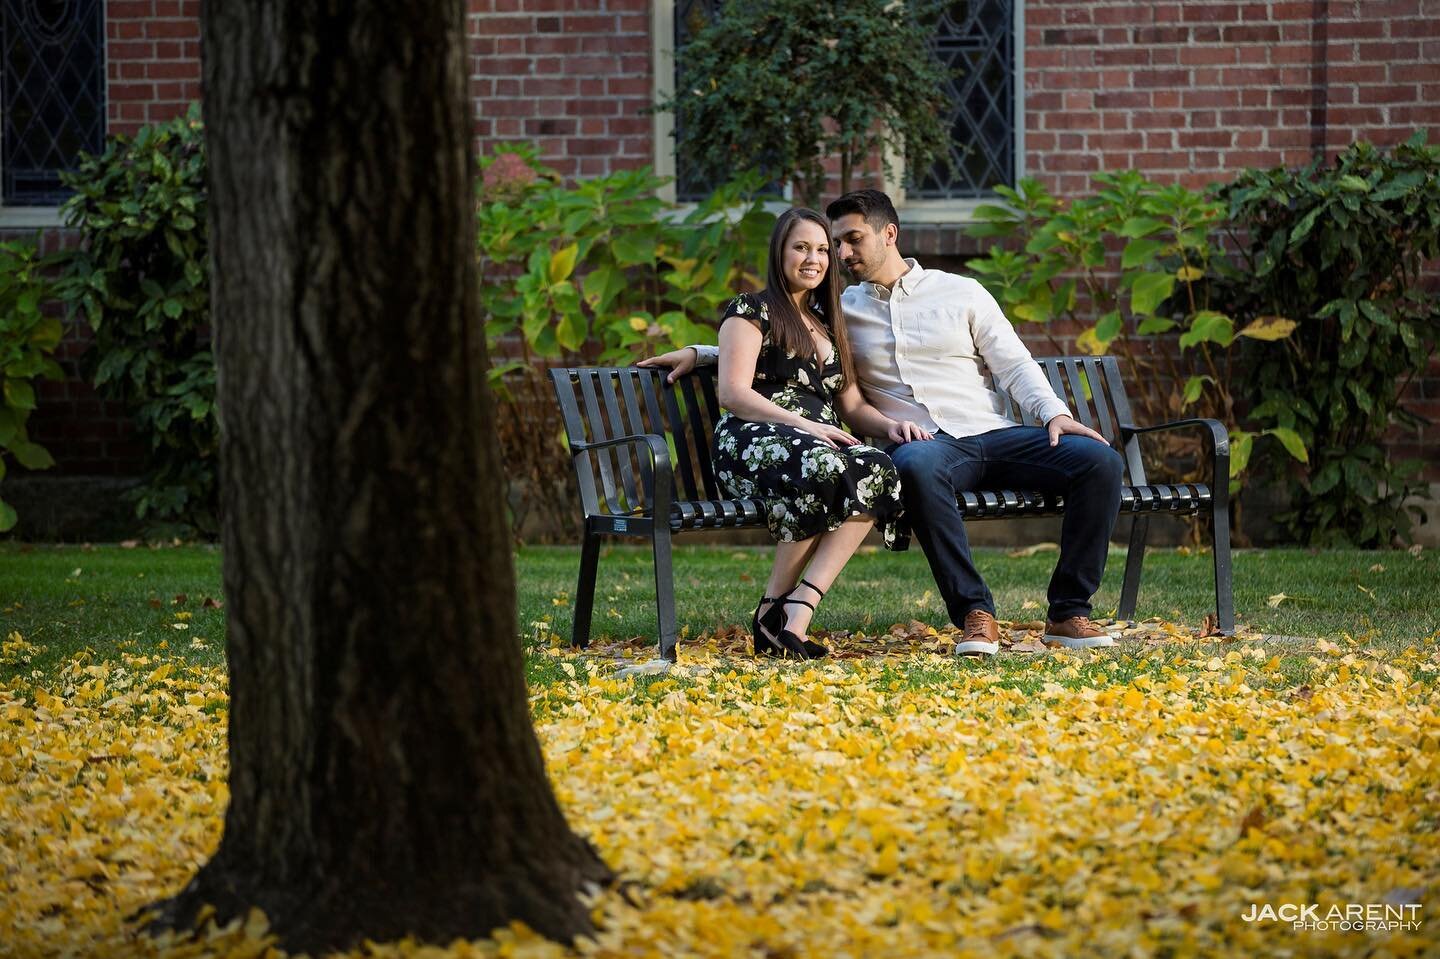 Kellee &amp; Rich back where it all started at the #universityofthepacific in #stockton #engagementphotos #love